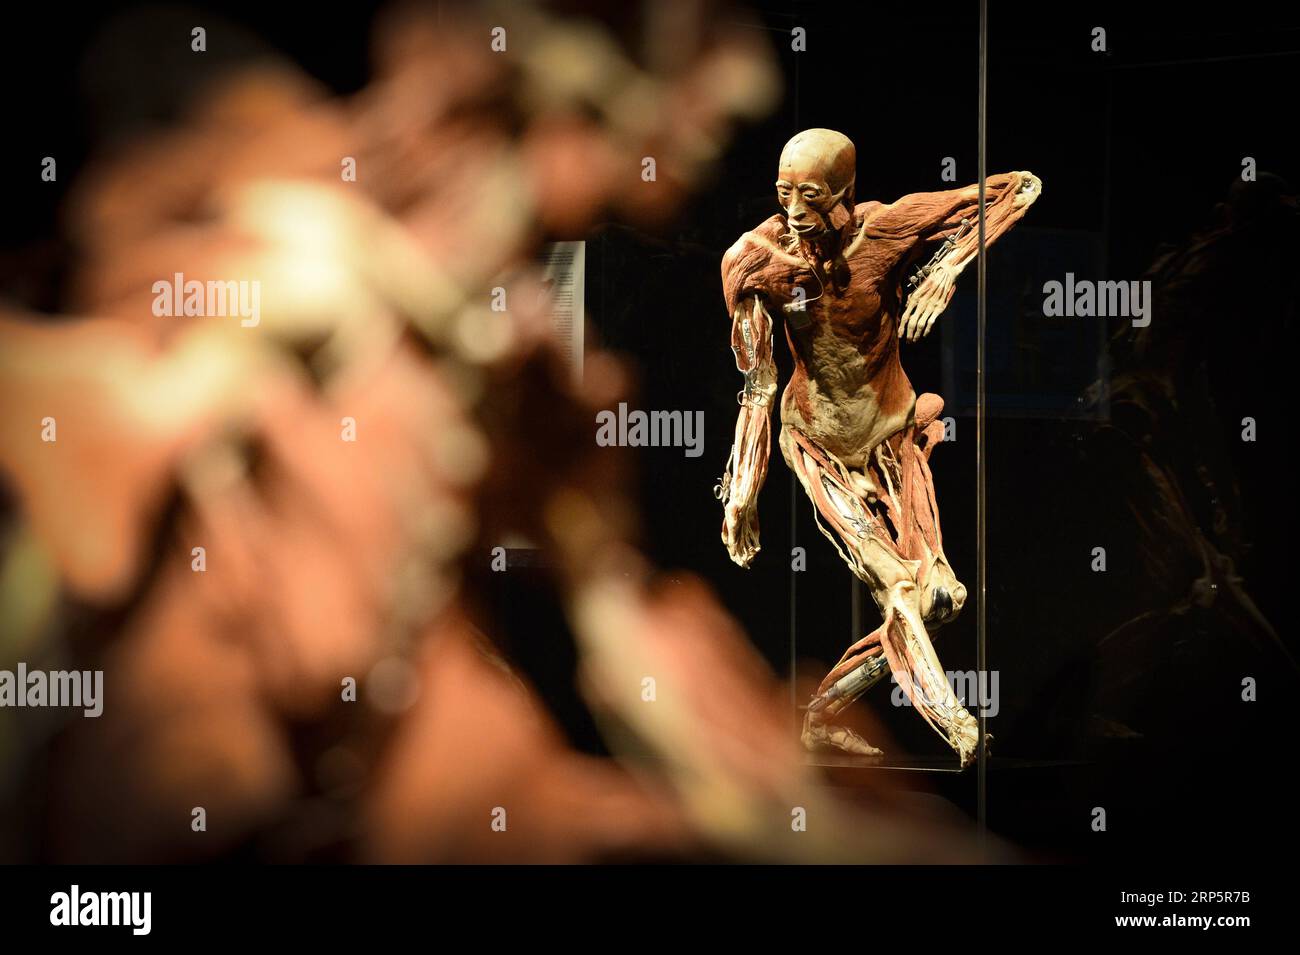 (181221) -- WARSAW, Dec. 21, 2018 -- Photo taken on Dec. 21, 2018 shows an exhibited body specimen at the Body Worlds exhibition at the Palace of Culture and Science in Warsaw, Poland. The Body Worlds exhibition displays dissected human bodies and animals. It was first presented in Tokyo in 1995. ) POLAND-WARSAW-BODY WORLDS-EXHIBITION JaapxArriens PUBLICATIONxNOTxINxCHN Stock Photo